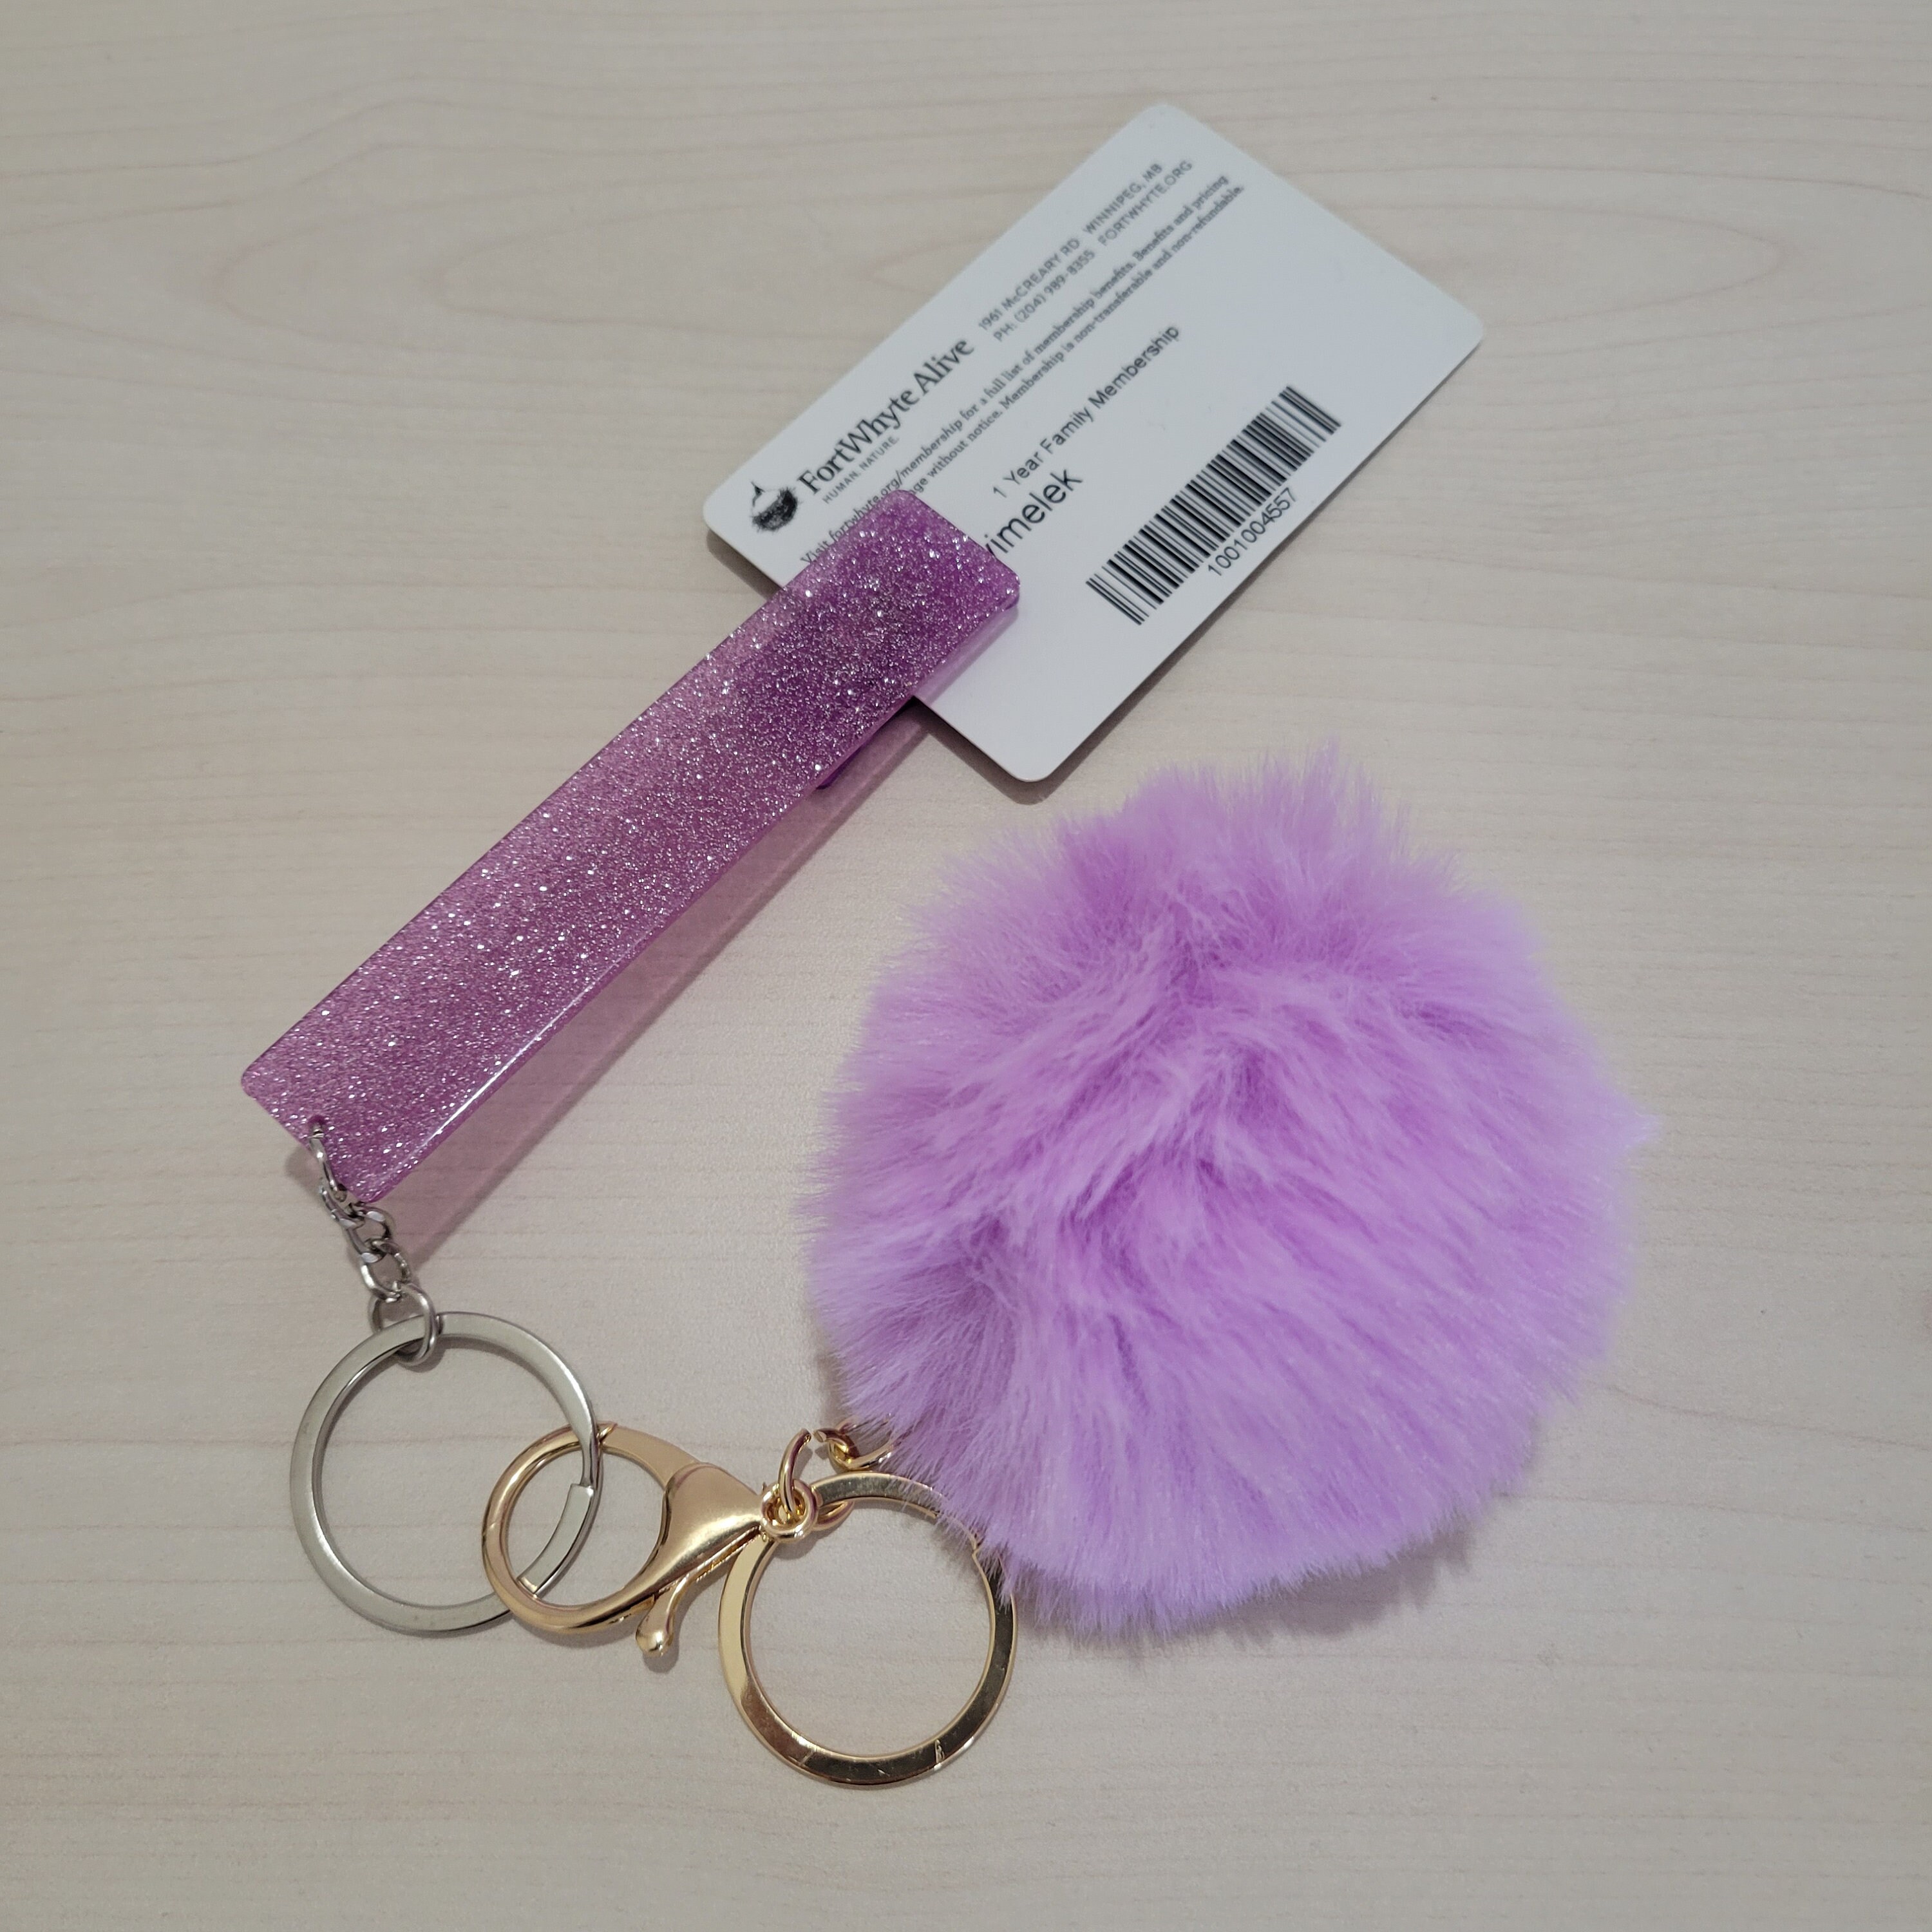 SZ-LY Card Grabber for Long Nails, Keychain with Pom Pom Ball and Plastic  Clip, Credit Card Puller for Long Nails Easy to Grab Your Card at The ​Gas